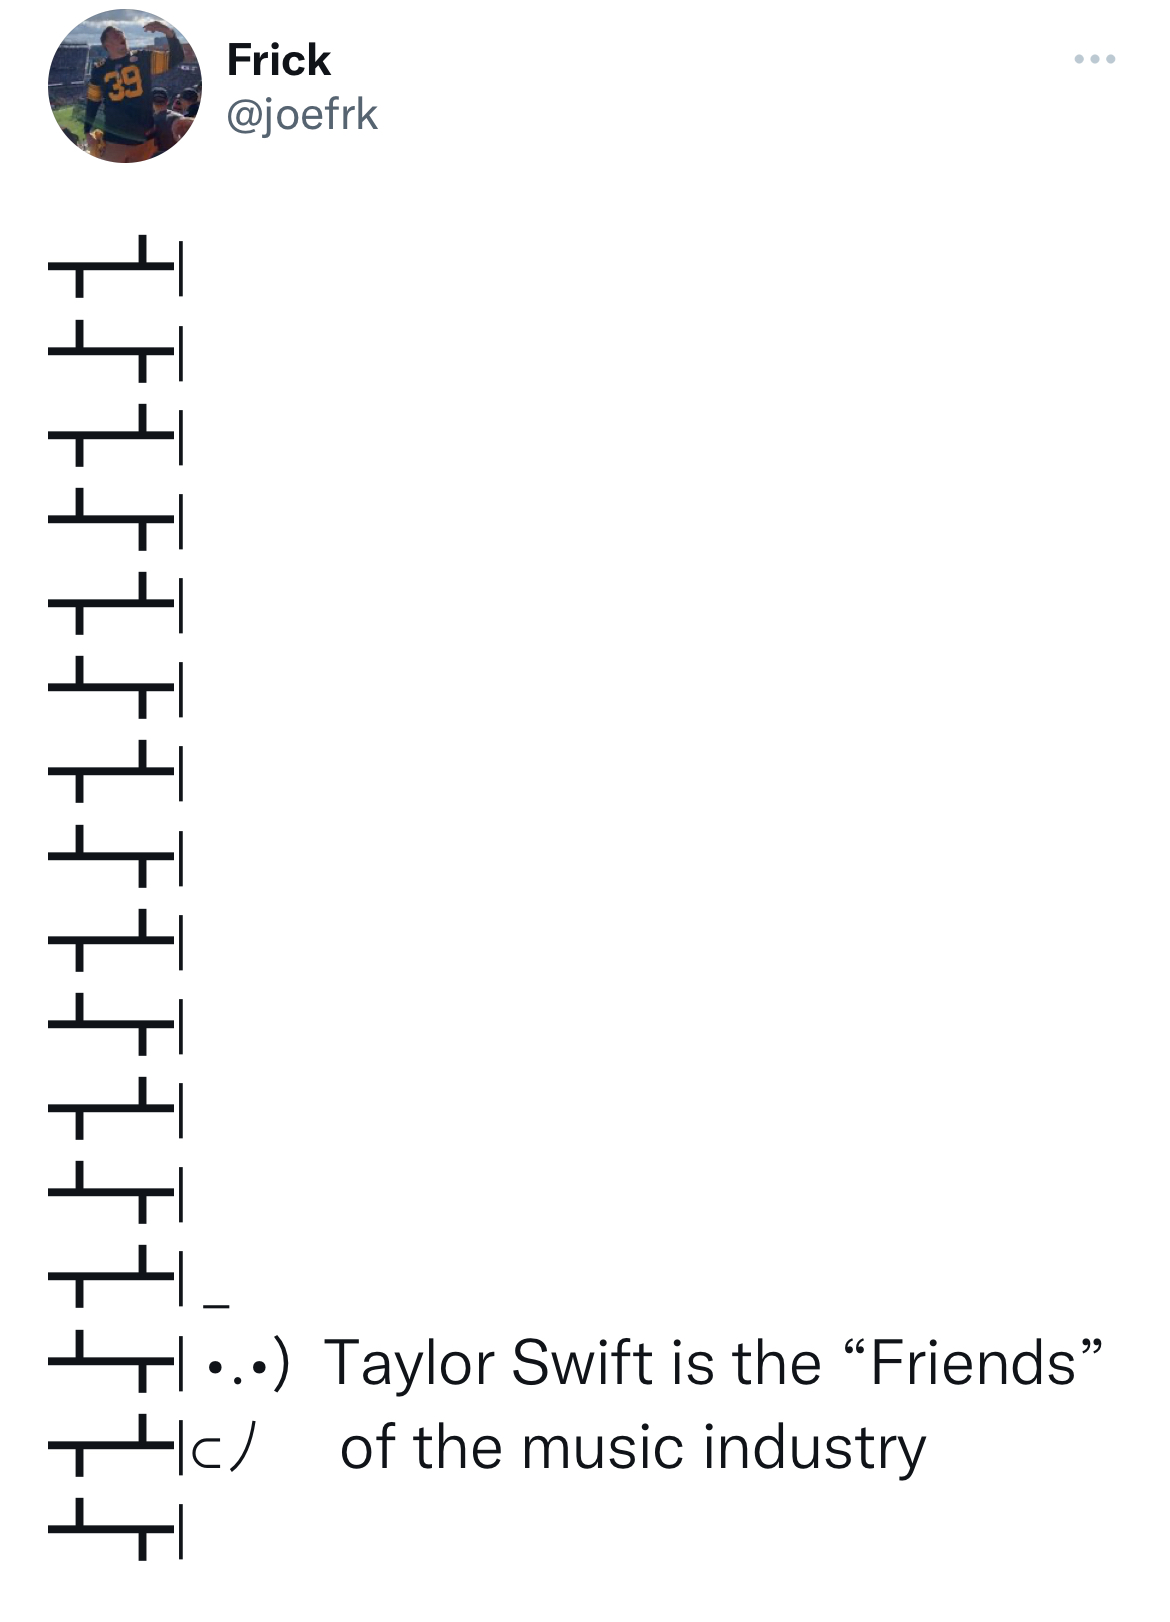 angle - Teletstatetitate Frick .Taylor Swift is the Friends of the music industry |c